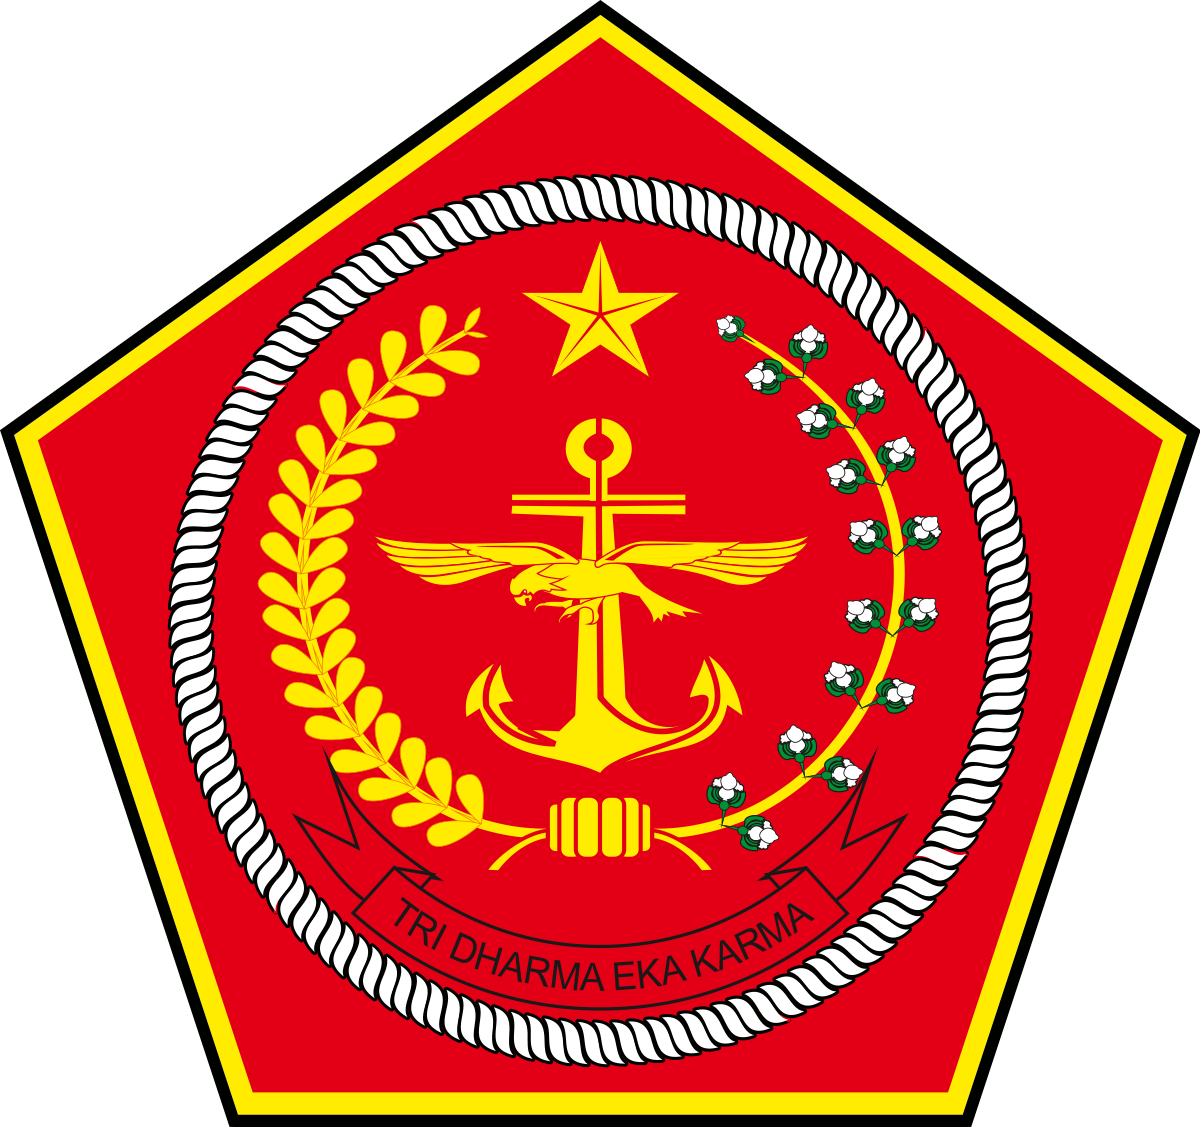 Insignia_of_the_Indonesian_National_Armed_Forces.svg